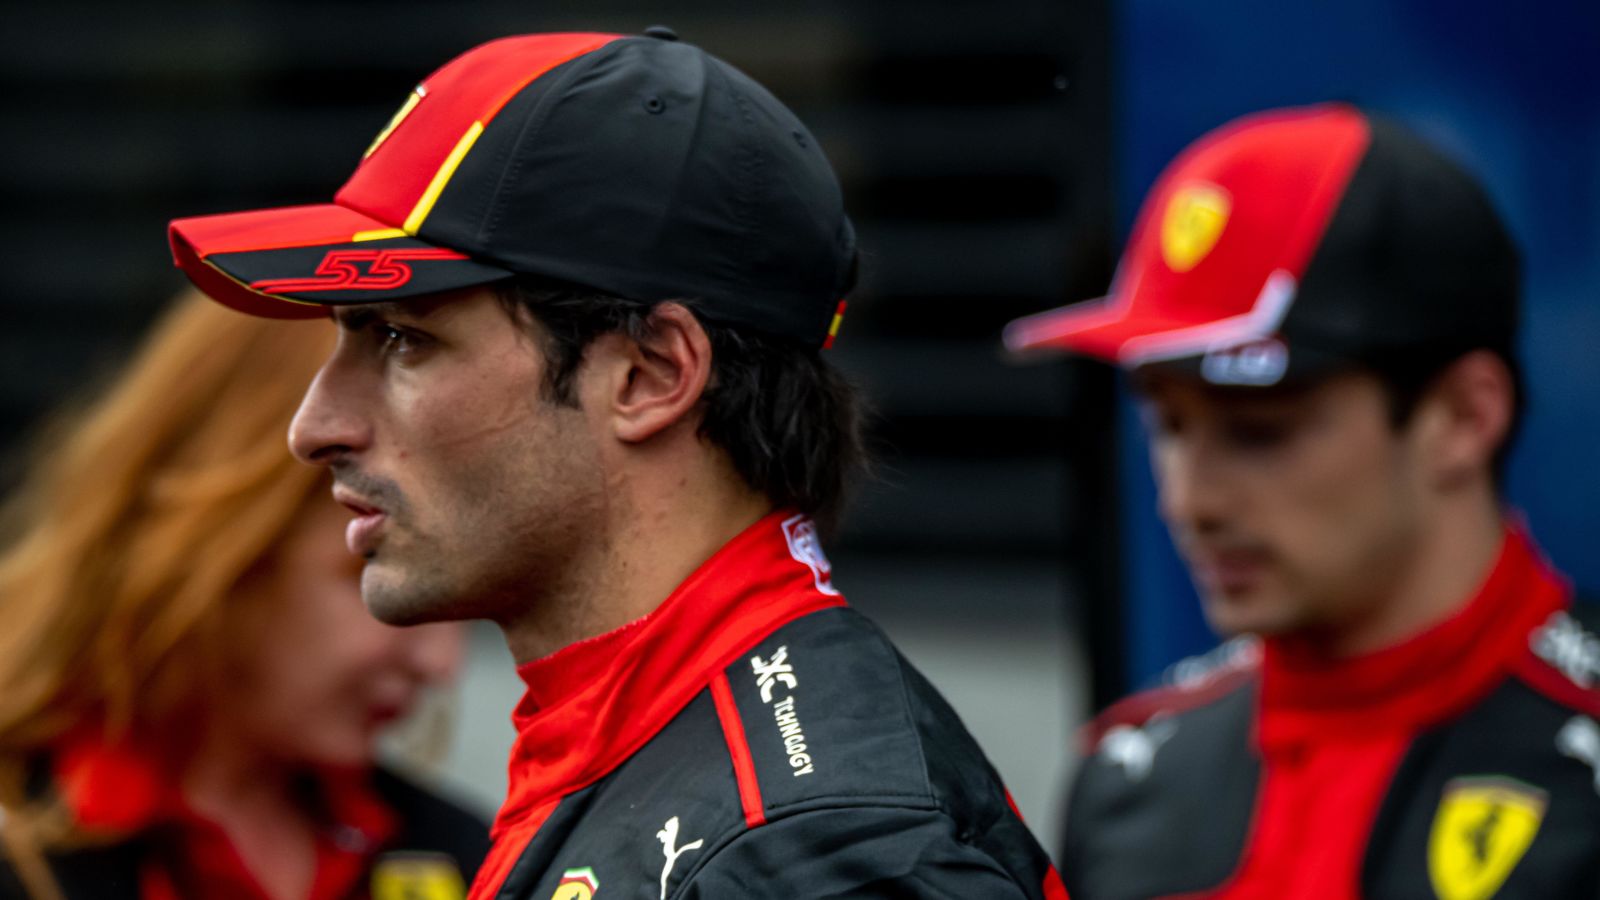 Clear' verdict on Carlos Sainz issued after Charles Leclerc signs new deal  first : PlanetF1